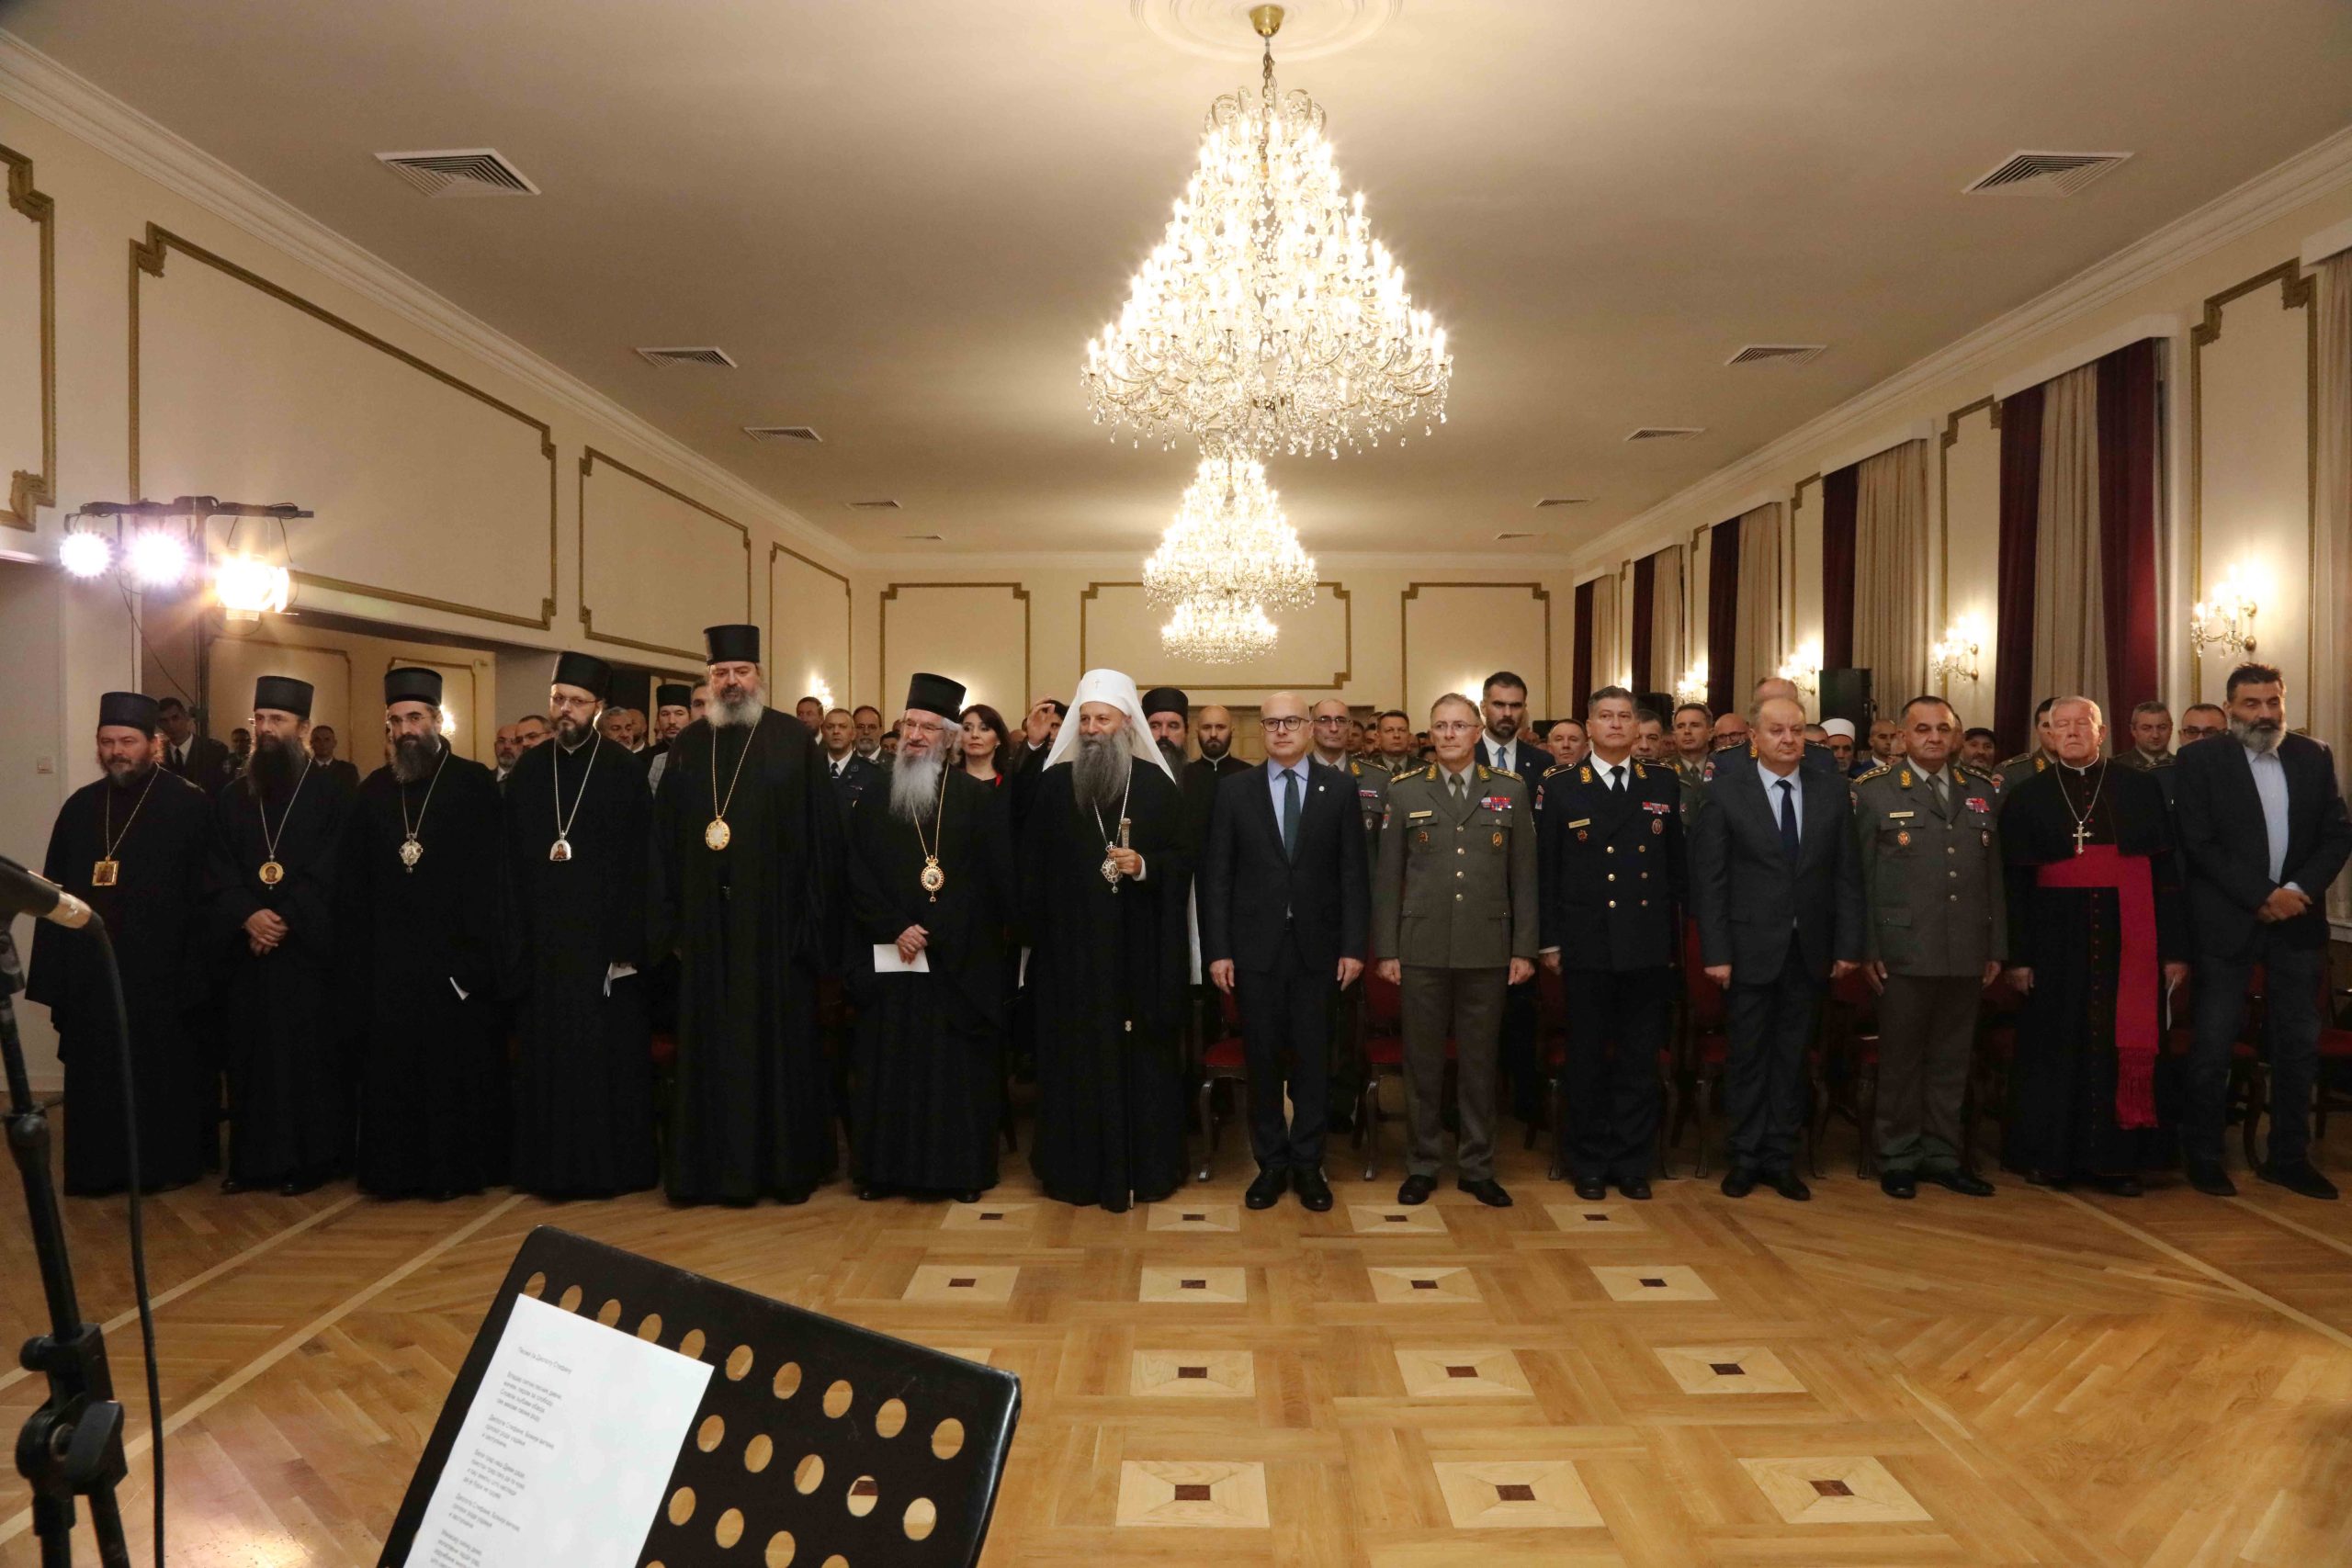 10th Anniversary of Renewed Religious Service in Serbian Army Celebrated with Grand Ceremony